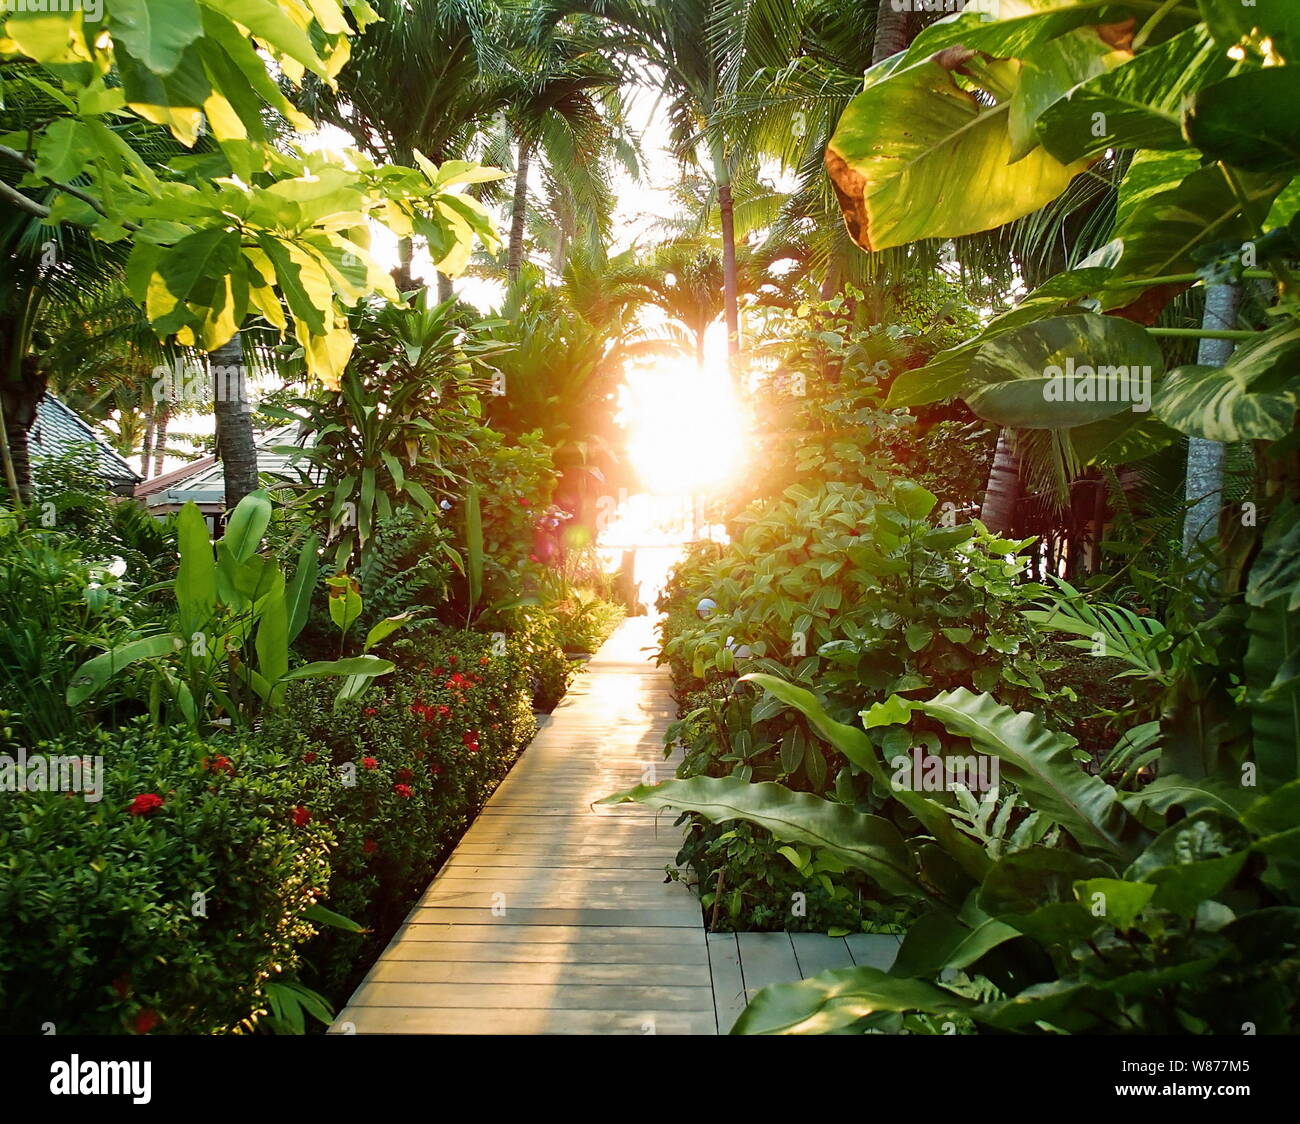 Morning sunlight in greenery, pathway in tropic jungle Stock Photo